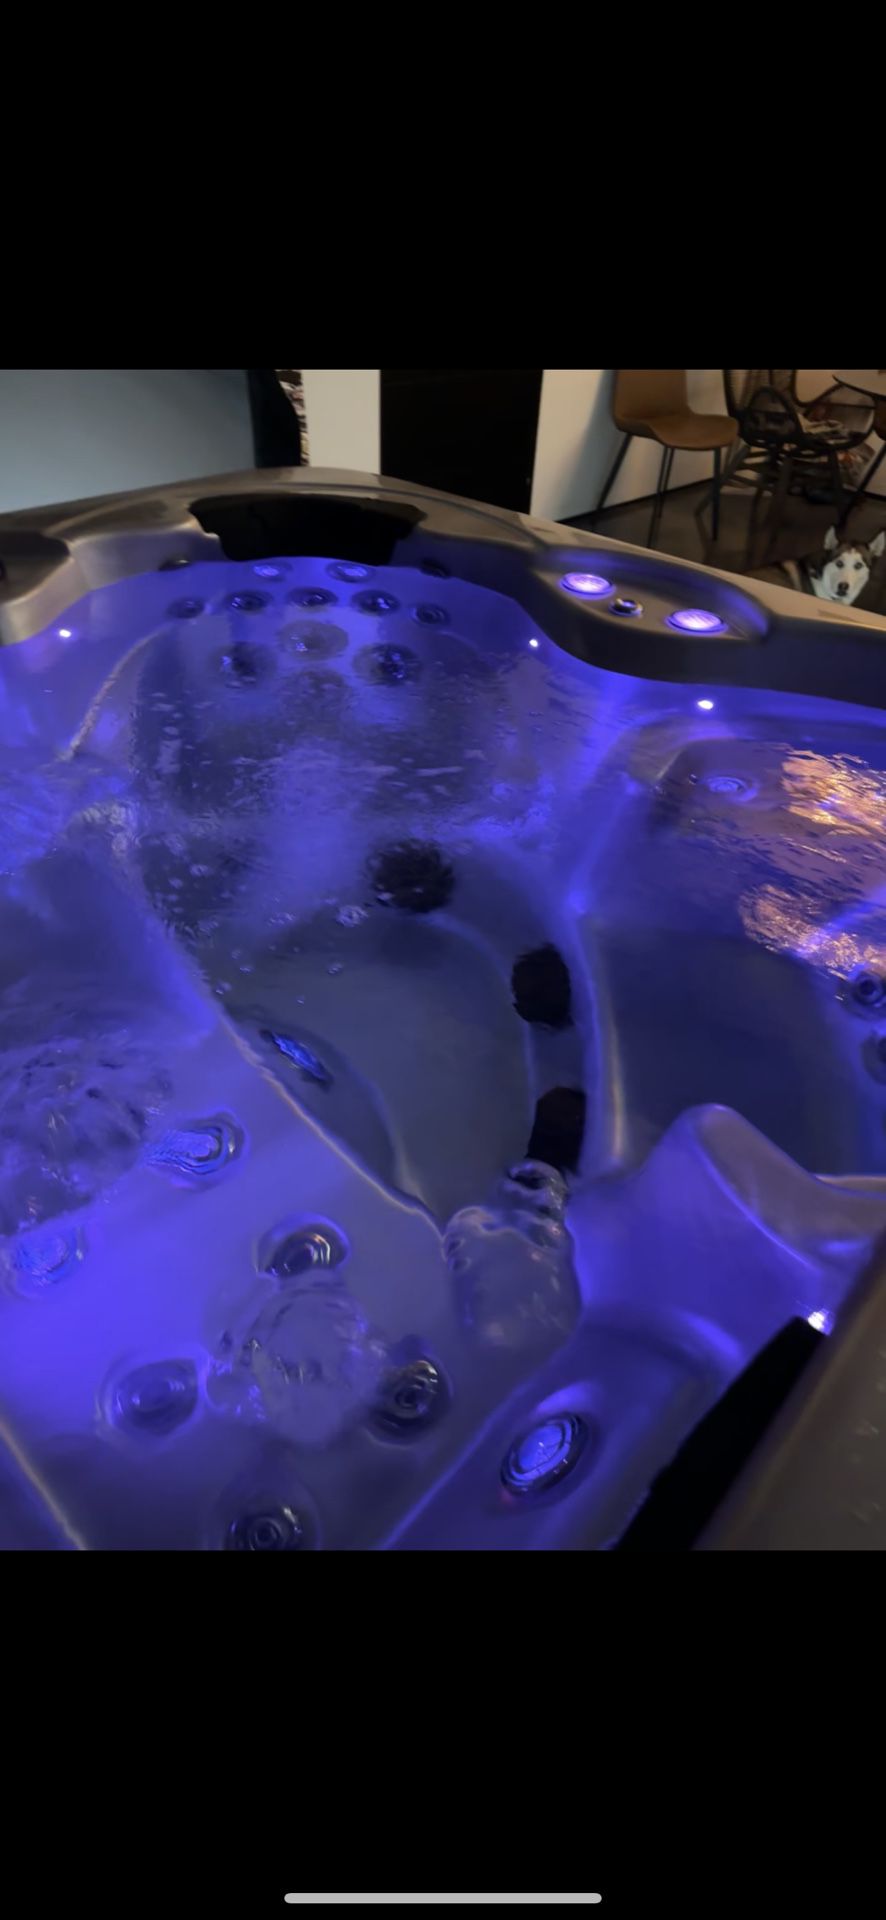 New High End 58 Jet Spa Hot Tub Seats 4